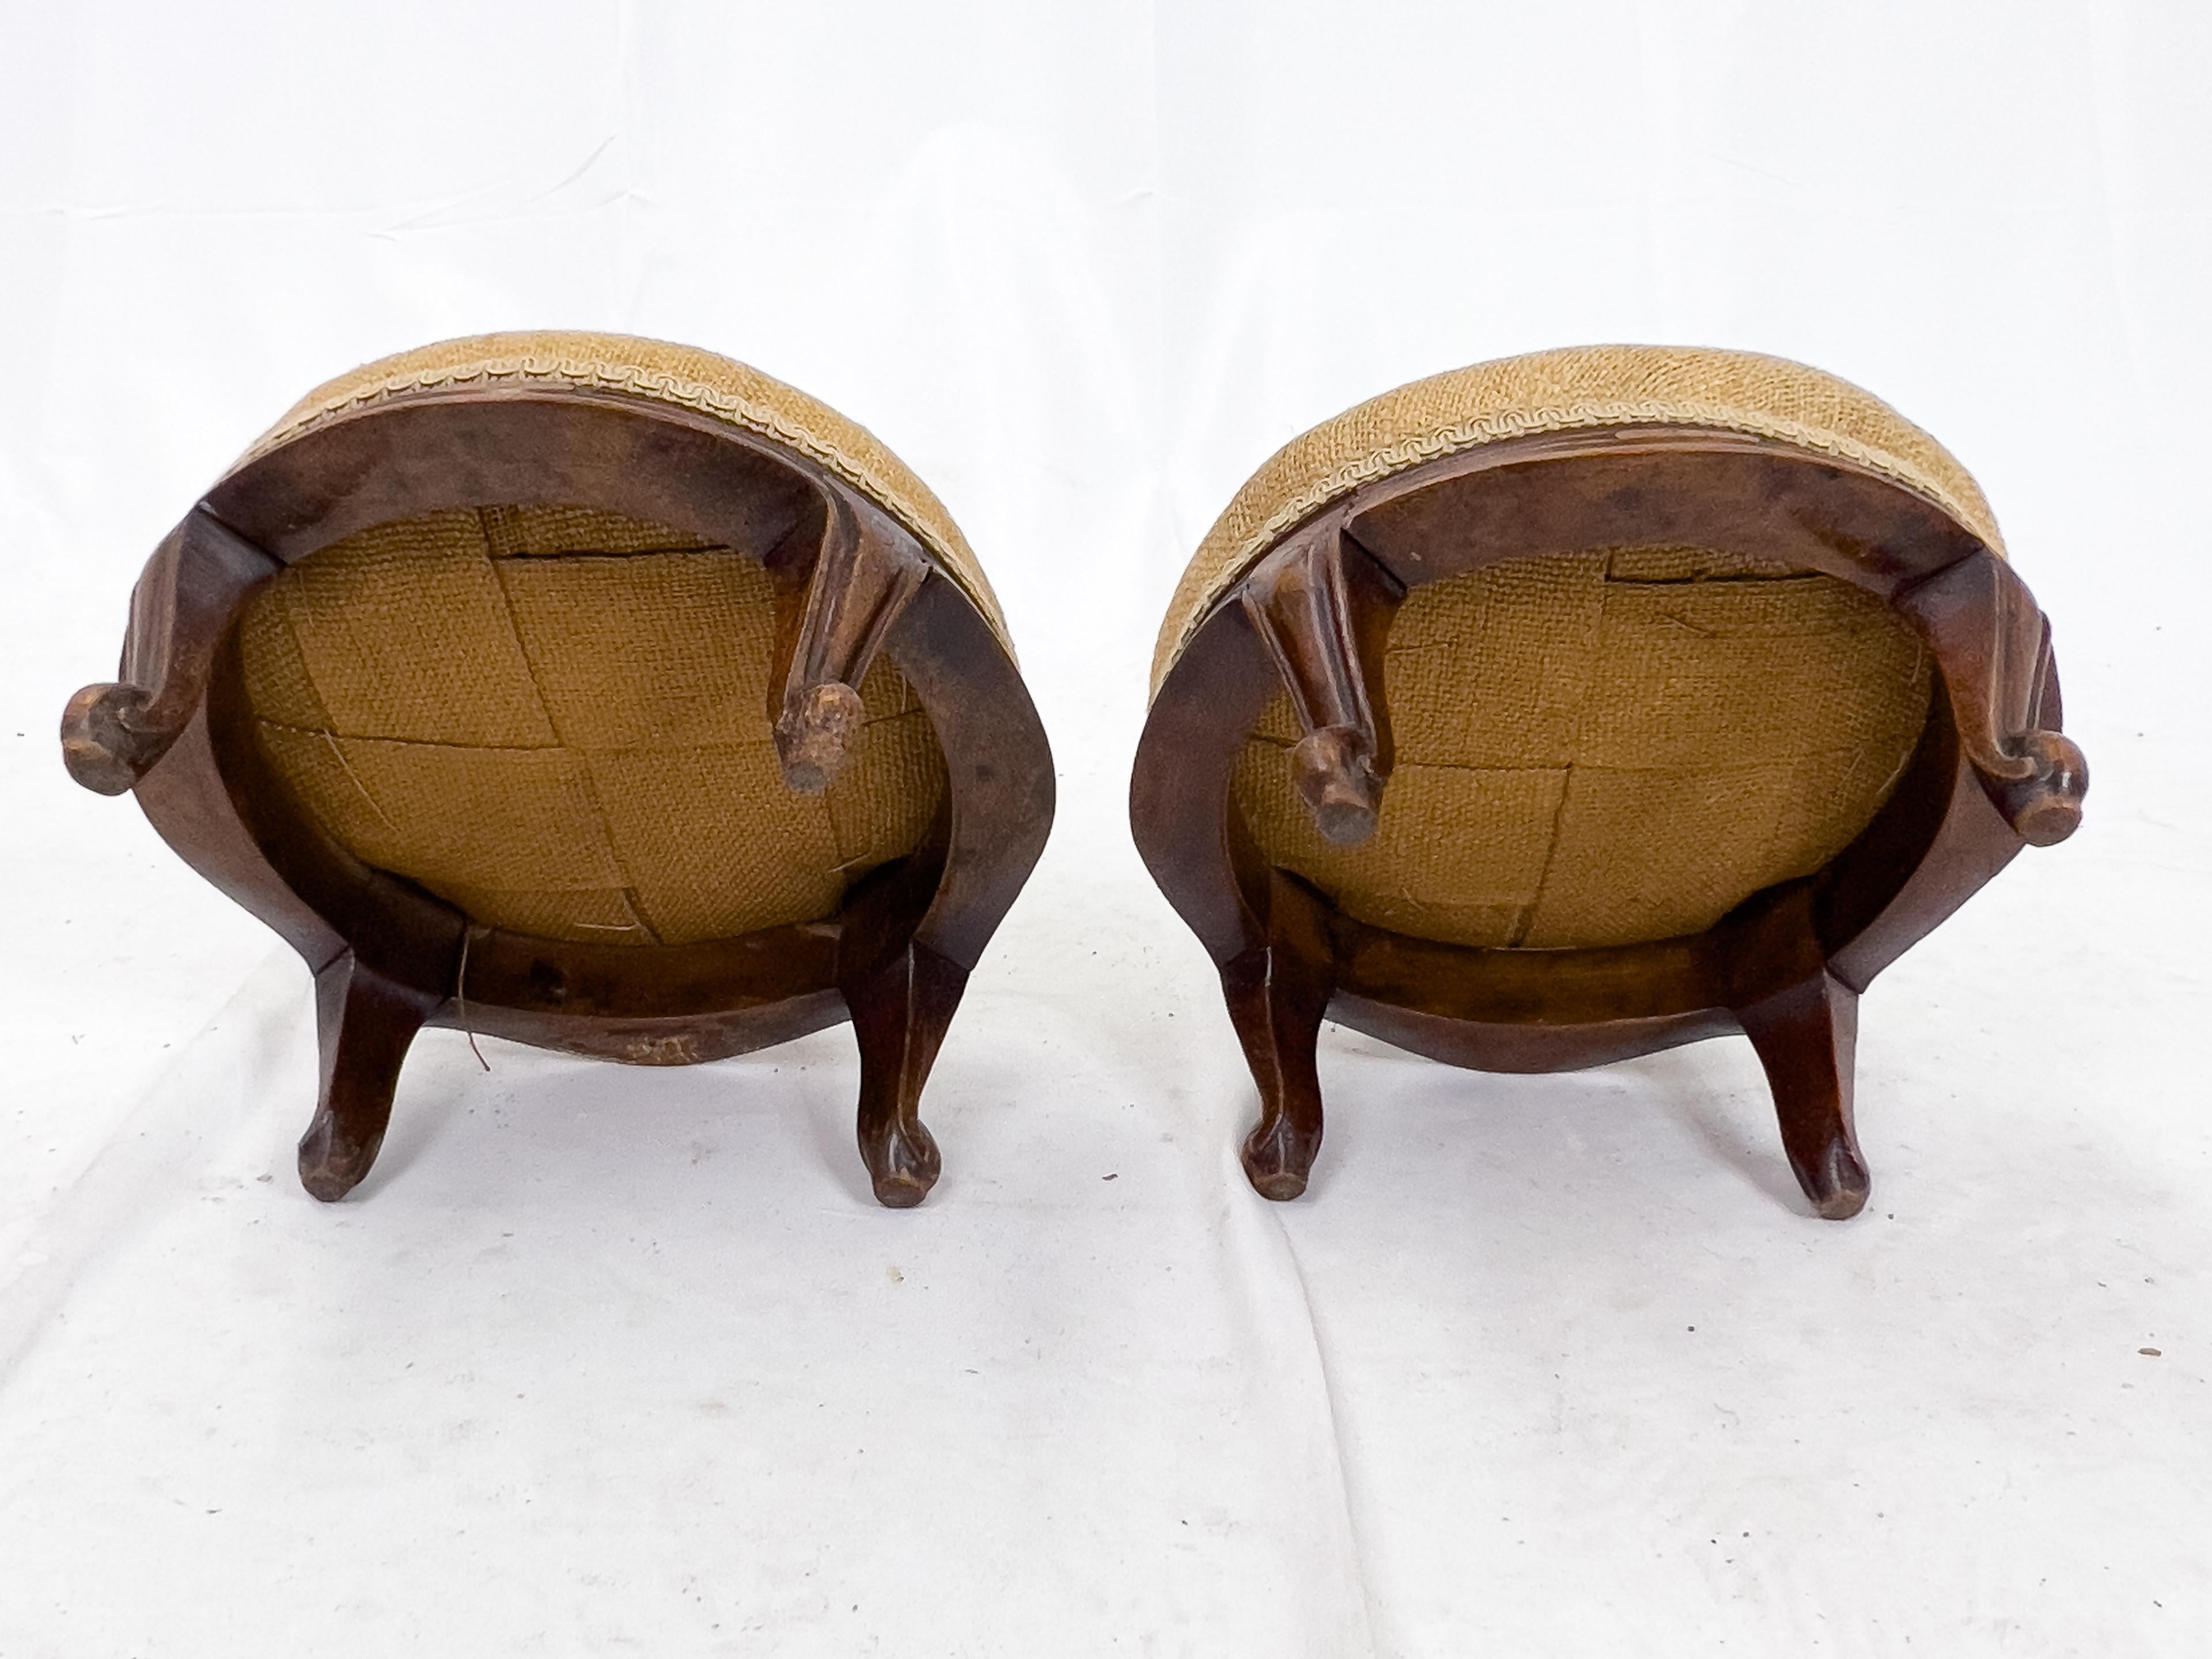 Pair of Small 19th Century Louis XV Style French Walnut and Burlap Foot Stools For Sale 6